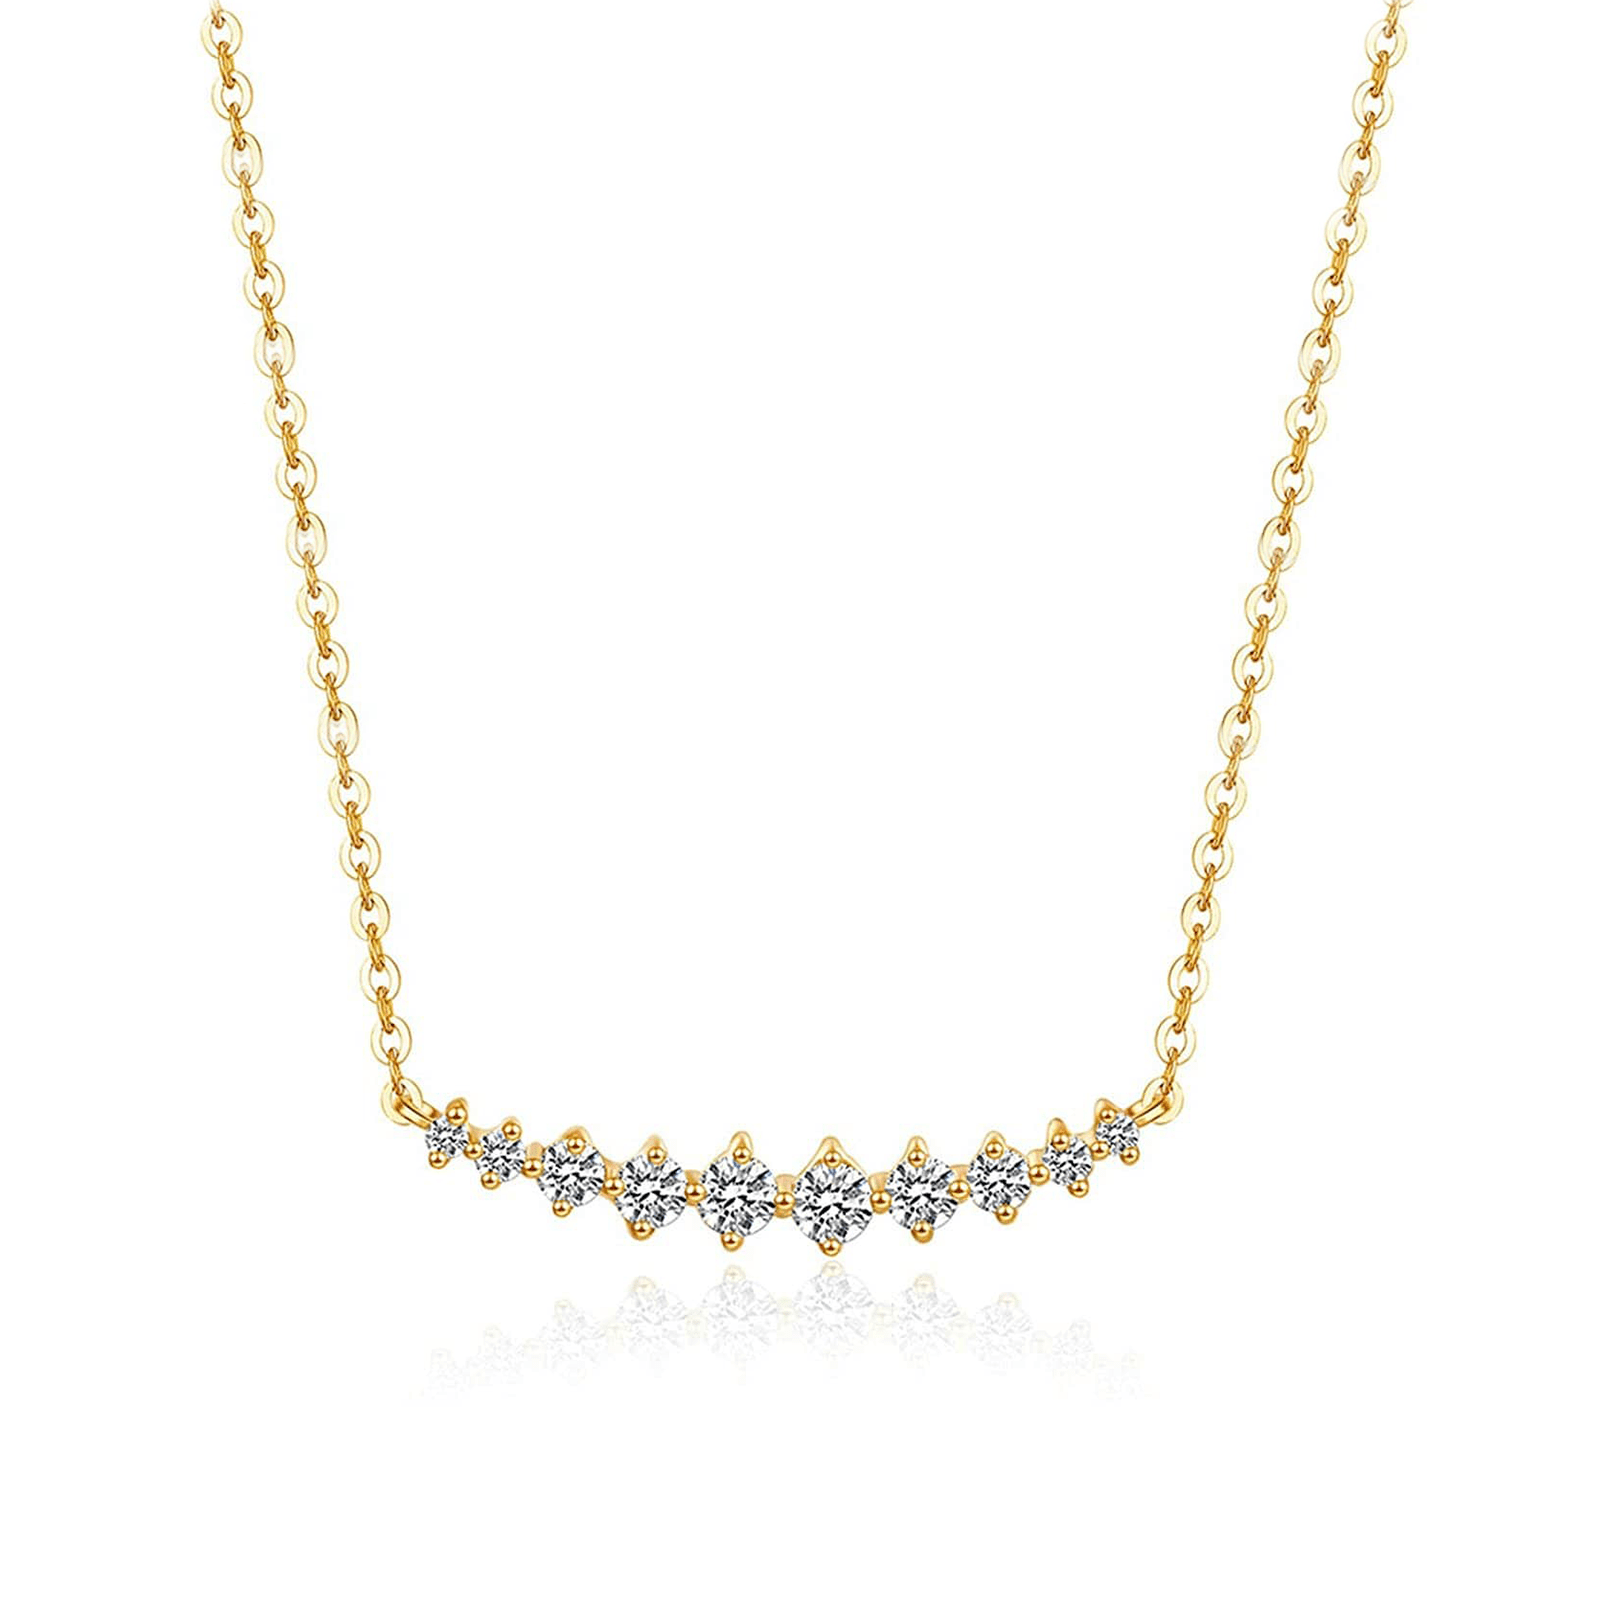 FANCIME "Mademoiselle White" Bar Smile 14K Yellow Gold Necklace Main